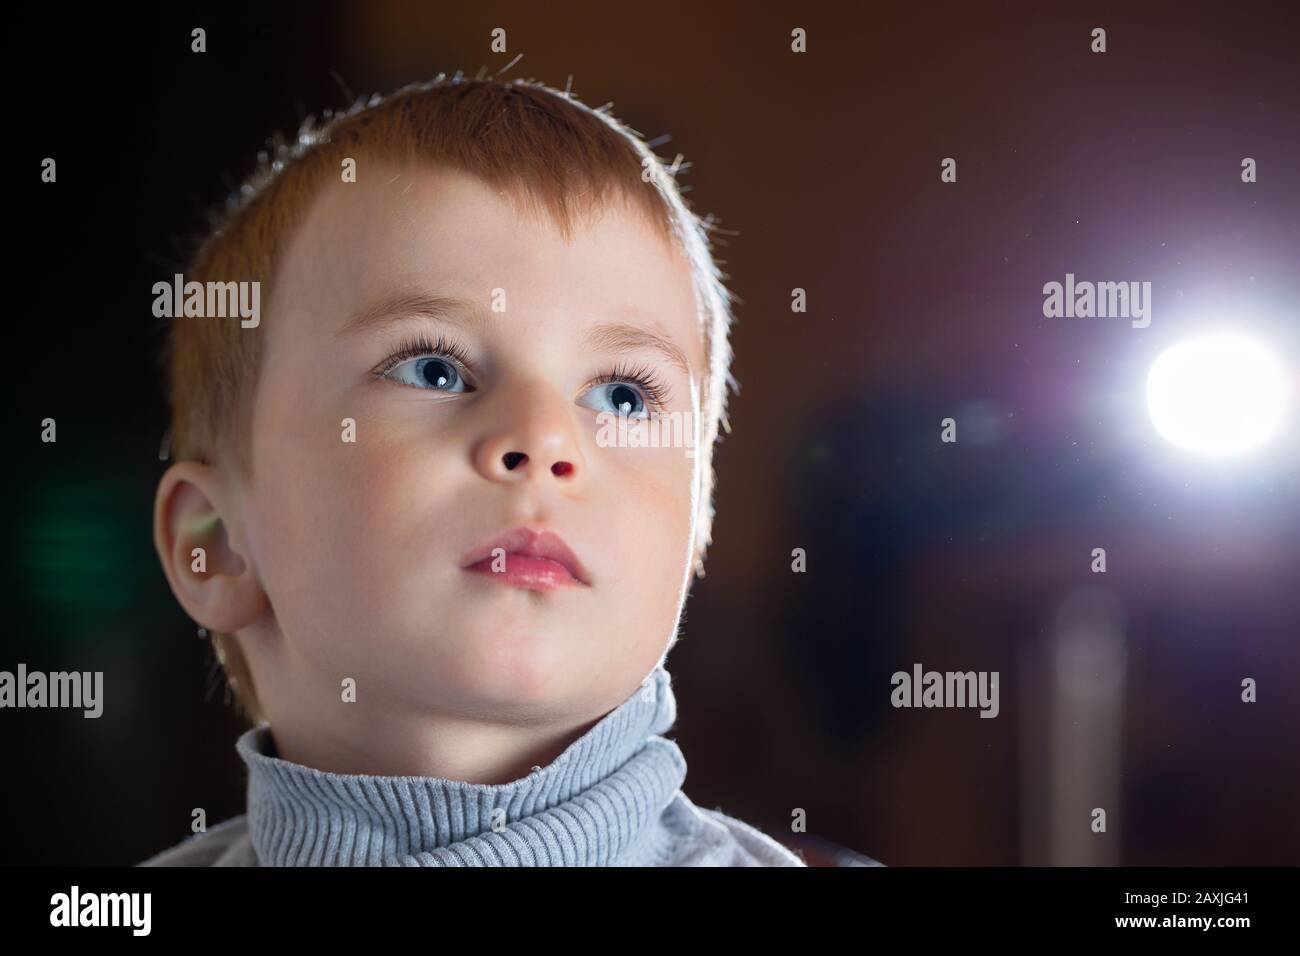 Facial portrait of dreamy pensive blond boy with gaze his eyes fixed upwards over dark background, with specks of dust flying in backlight with flares Stock Photo